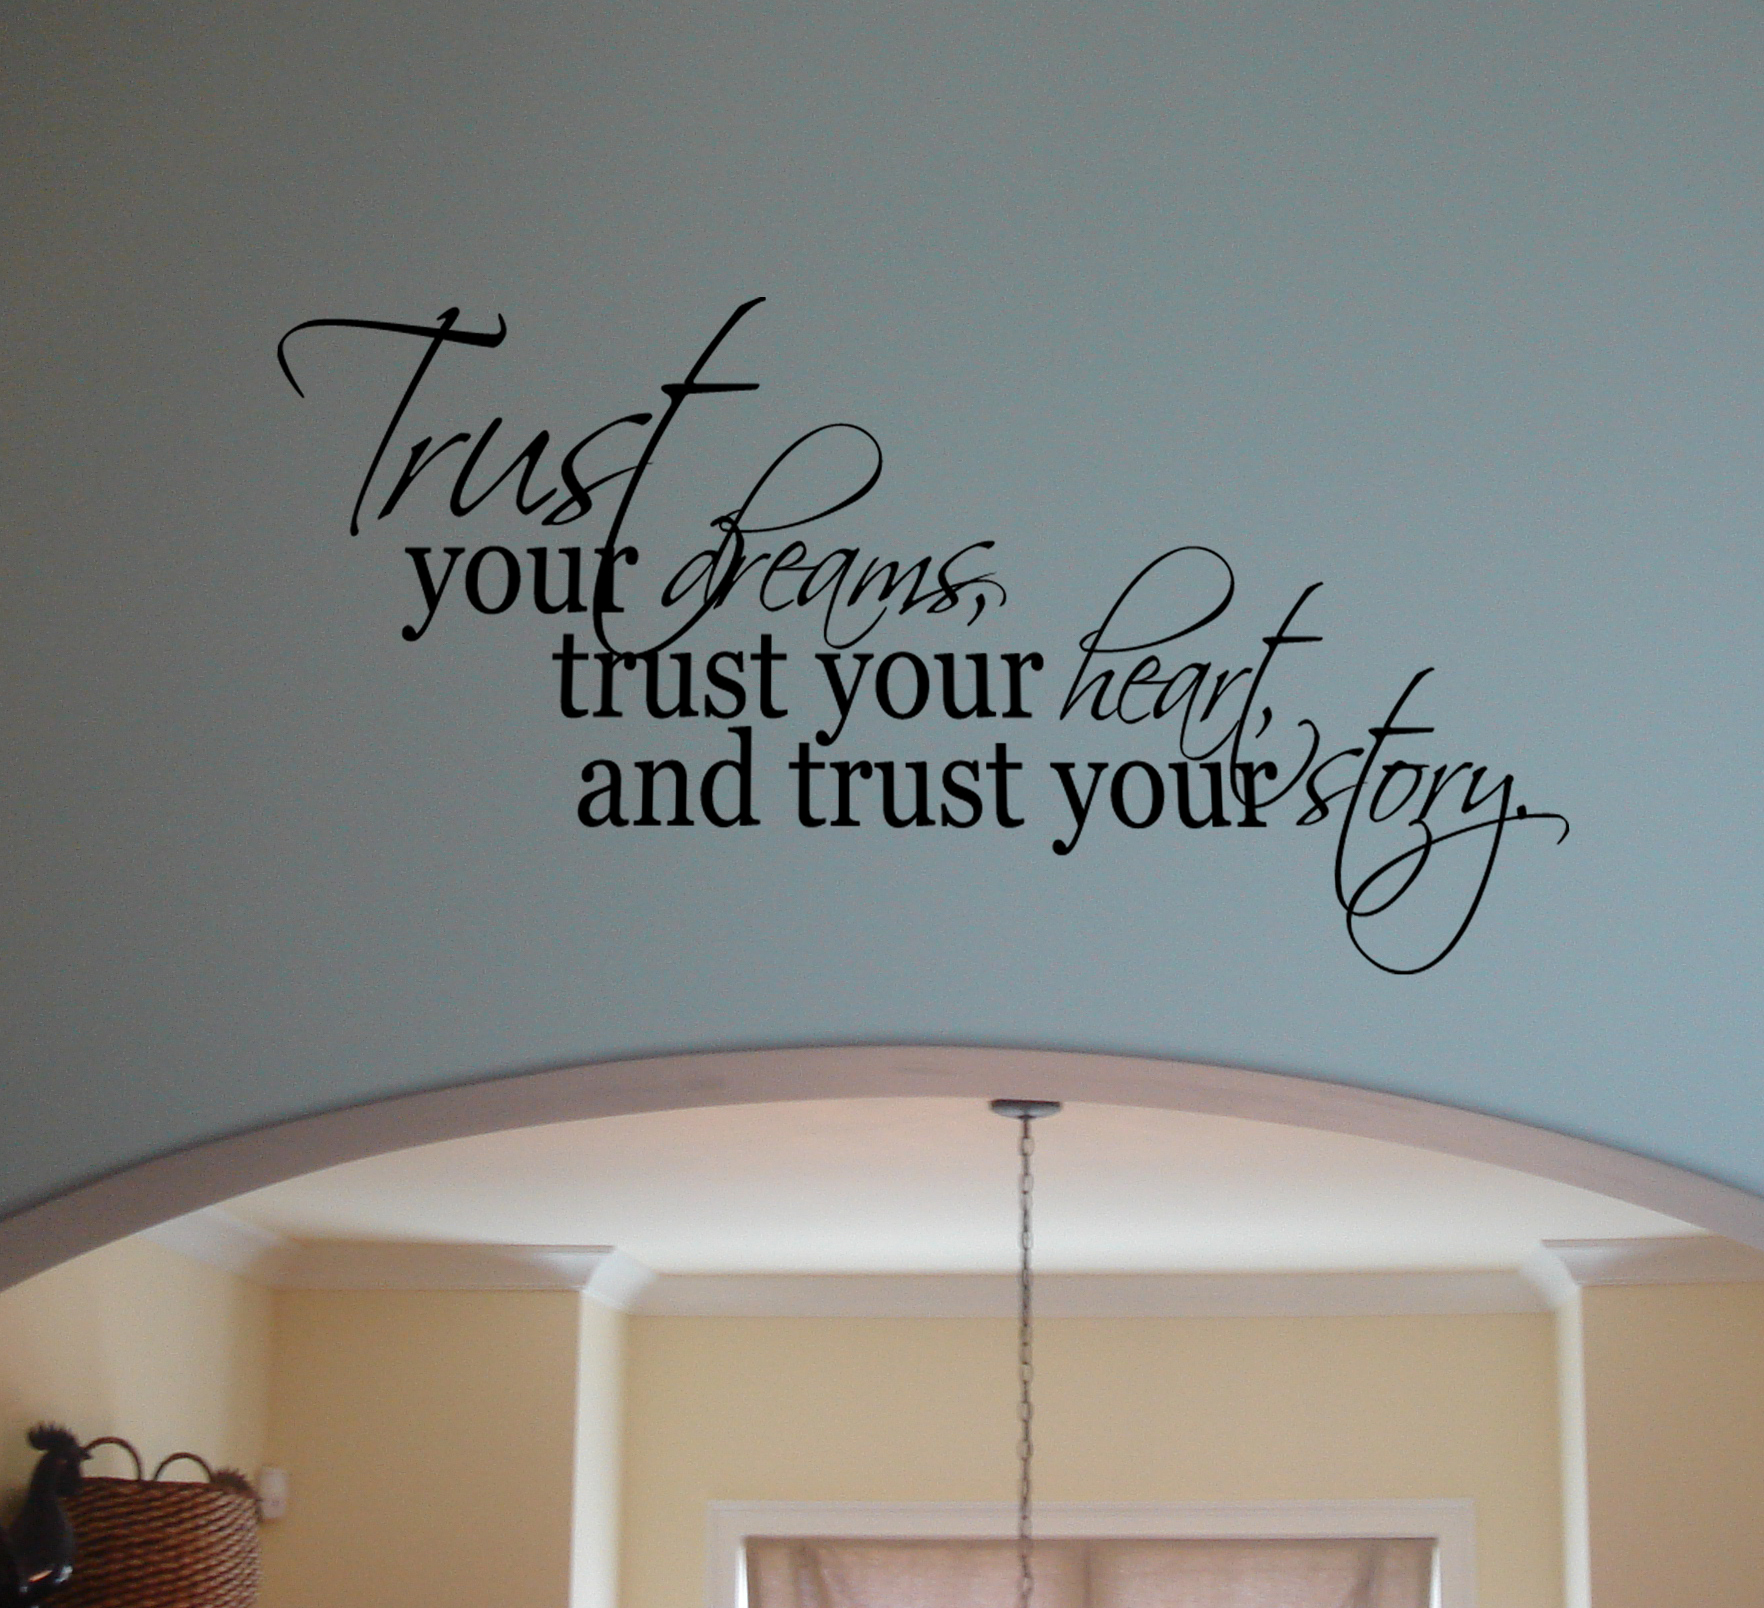 Trust Your Dreams Heart Story Wall Decal